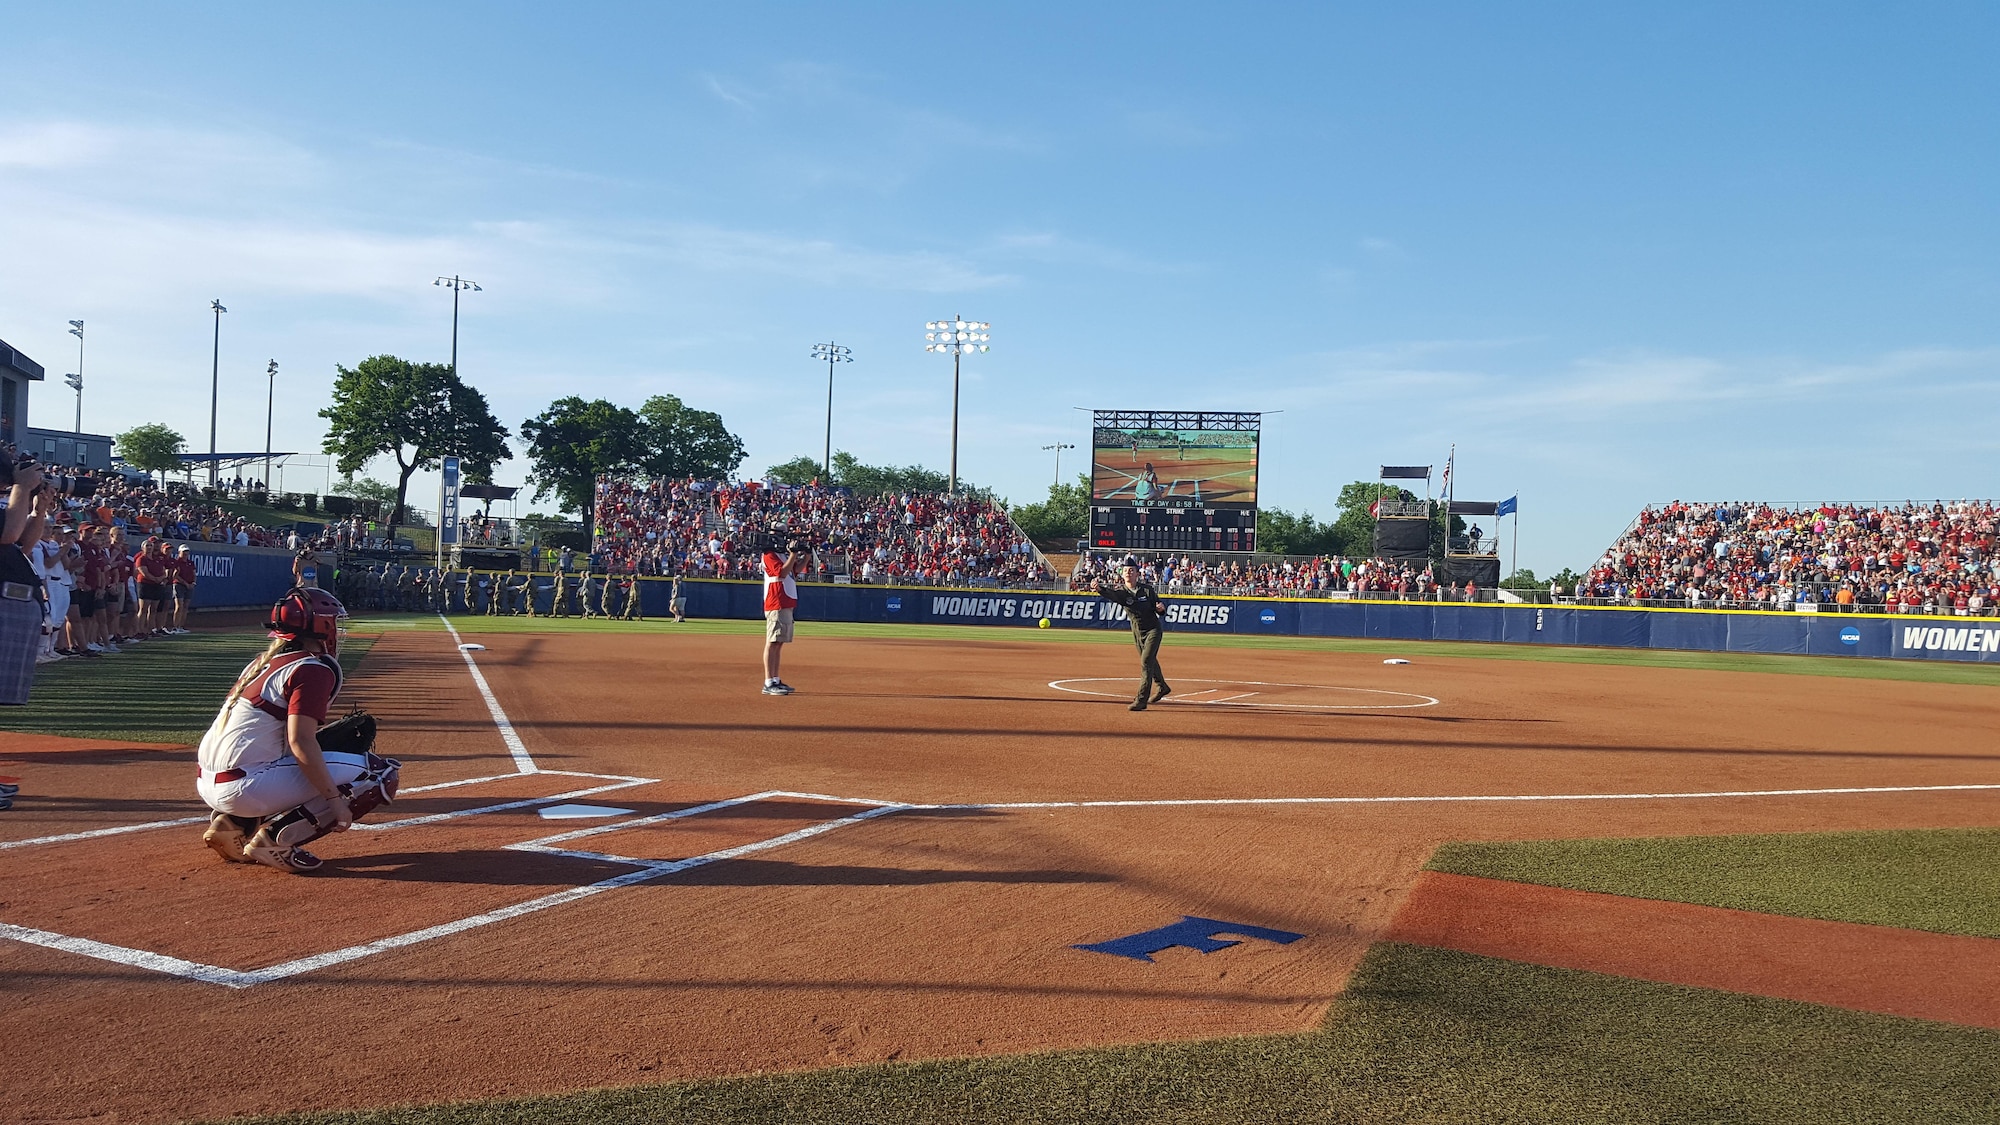 Staff Sgt. Danielle Warren, 344th Air Refueling Squadron KC-135 Stratotanker boom operator, throws the ceremonial first pitch at the NCAA Women’s College World Series, June 6, 2017, at USA Softball Hall of Fame Stadium, OGE Energy Field, Oklahoma City, Oklahoma. The NCAA held a military appreciation night to thank service members and veterans for their service. (U.S. Air Force photo/2nd Lieutenant Carla Stefaniak)